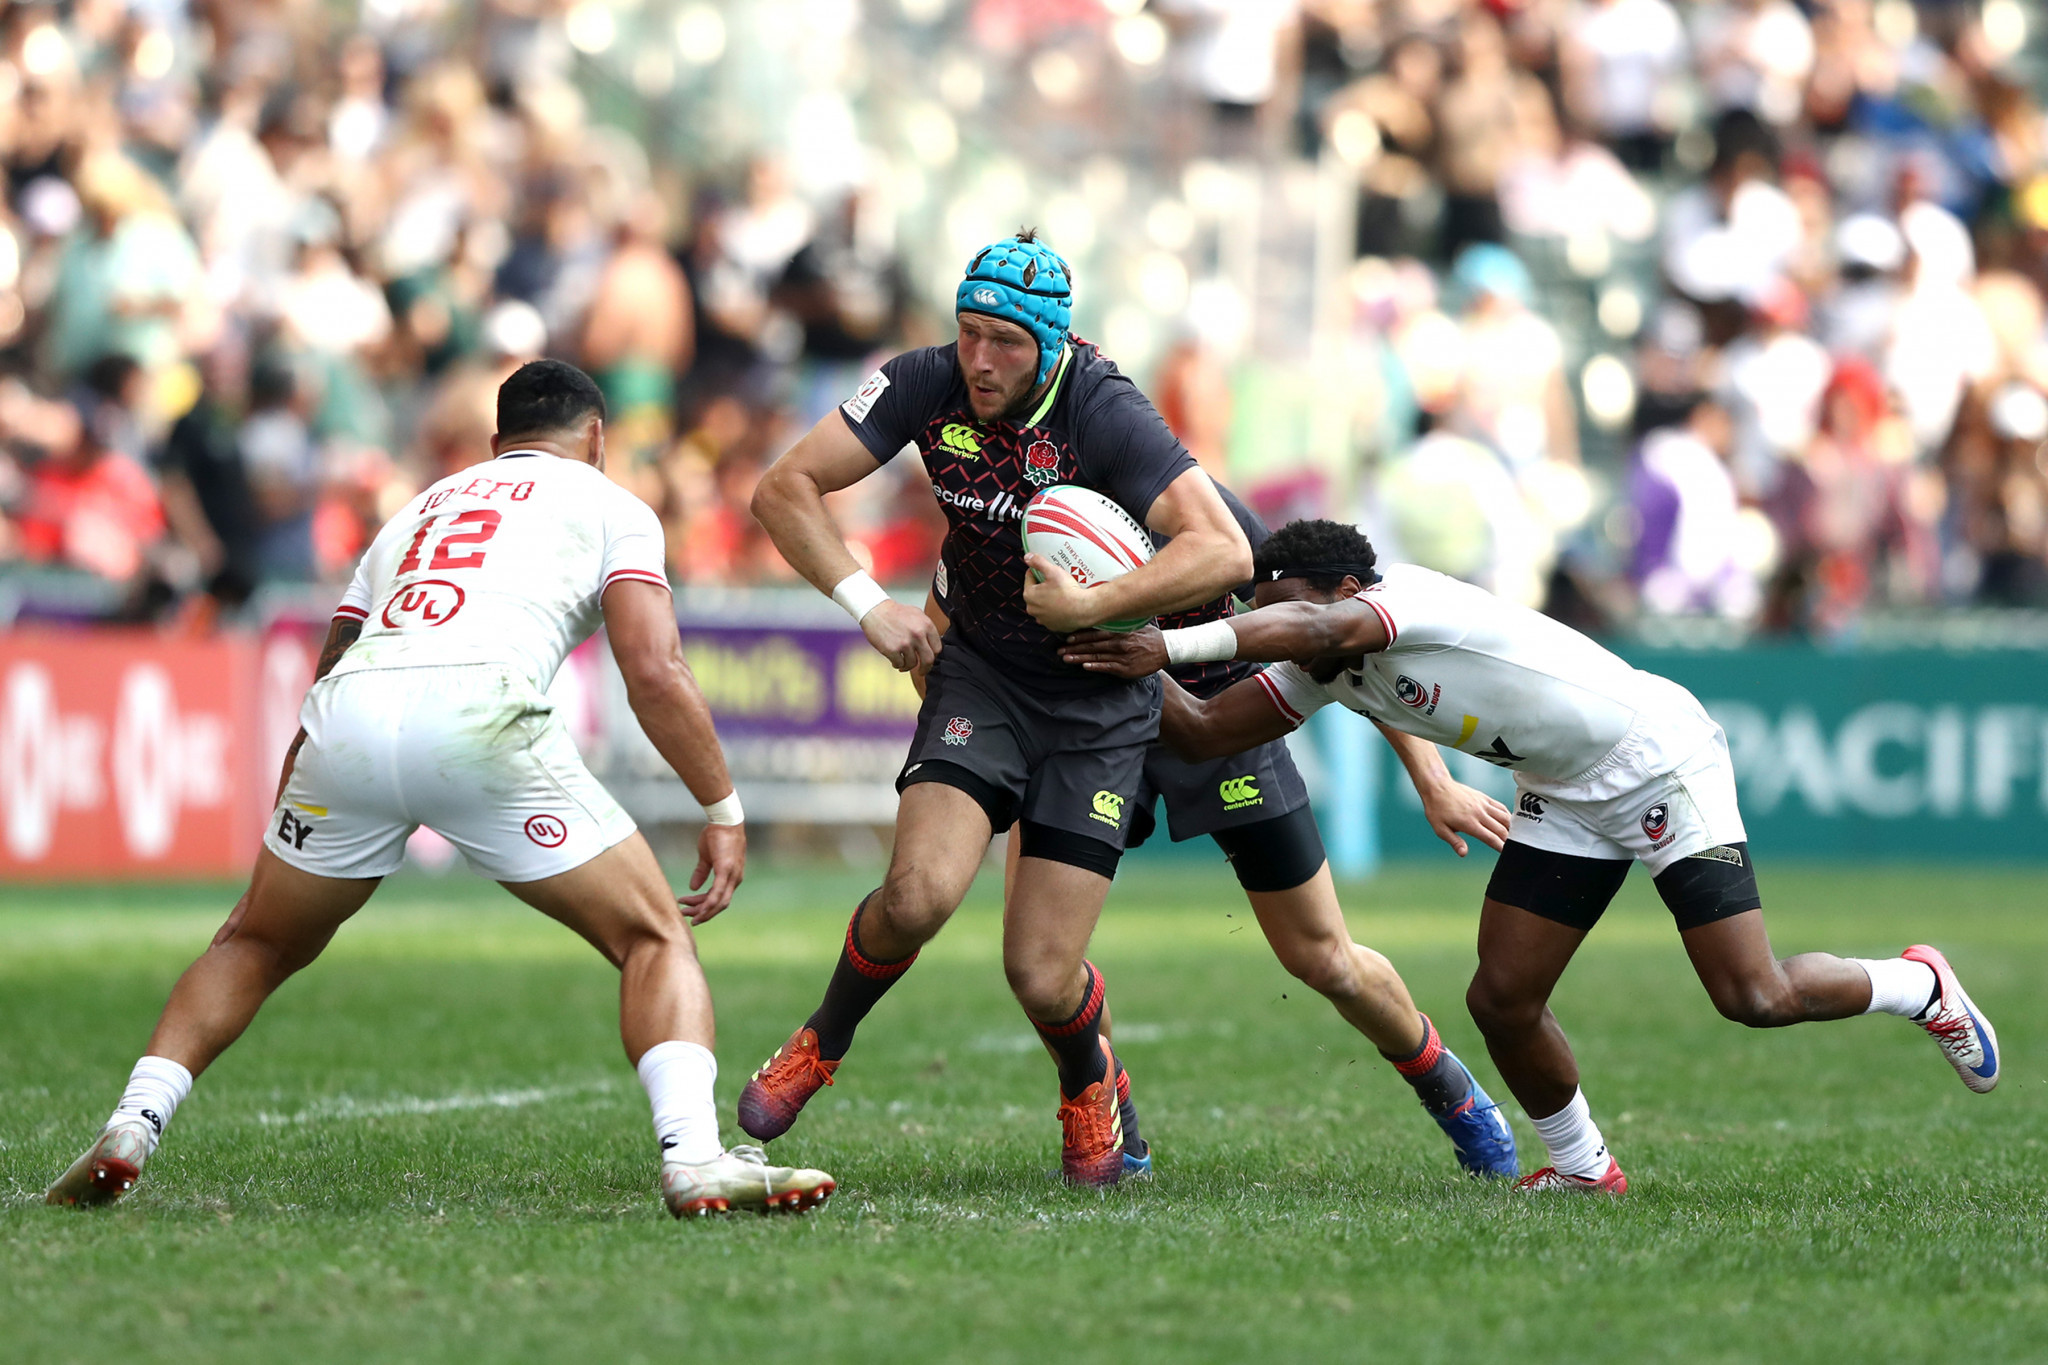 World Rugby Sevens Series leaders United States squeezed through to the quarter-finals of the Hong Kong Sevens, despite losing both of their pool matches today ©World Rugby